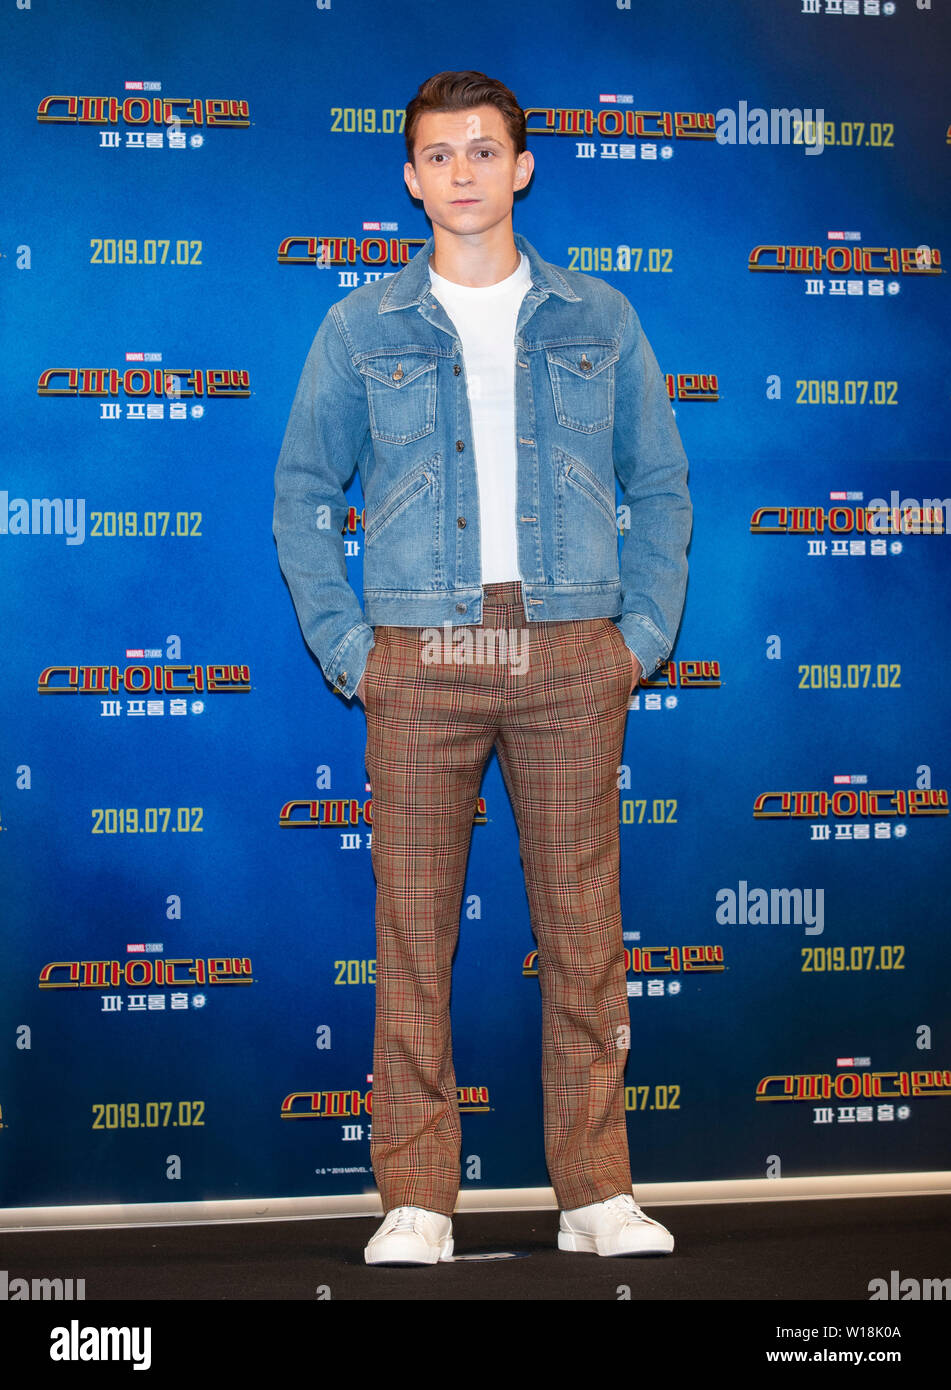 Seoul, South Korea. 1st July, 2019. Actor Tom Holland poses for photos  during a promotion activity of the film "Spider-Man: Far From Home" in  Seoul, South Korea, July 1, 2019. The movie